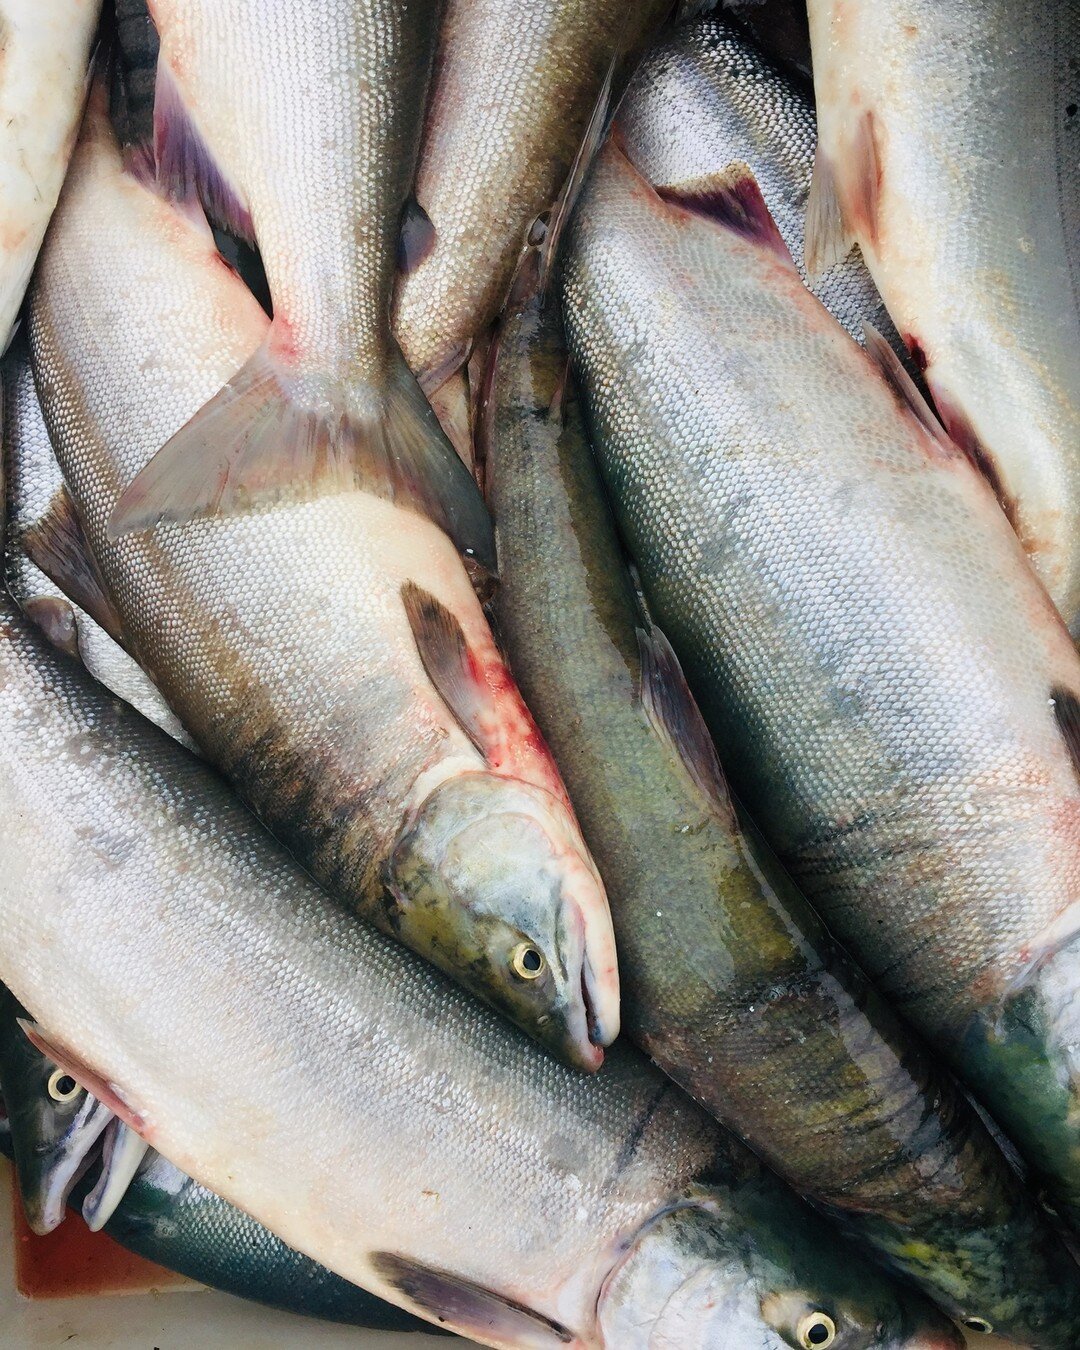 We have heard reports from  Kuskokwim fishermen that they are beginning to catch chum salmon on lower river tributaries. It's still unclear how the 2021 chum run will pan out, but we are hopeful our fish will return and our smokehouses will be full. 